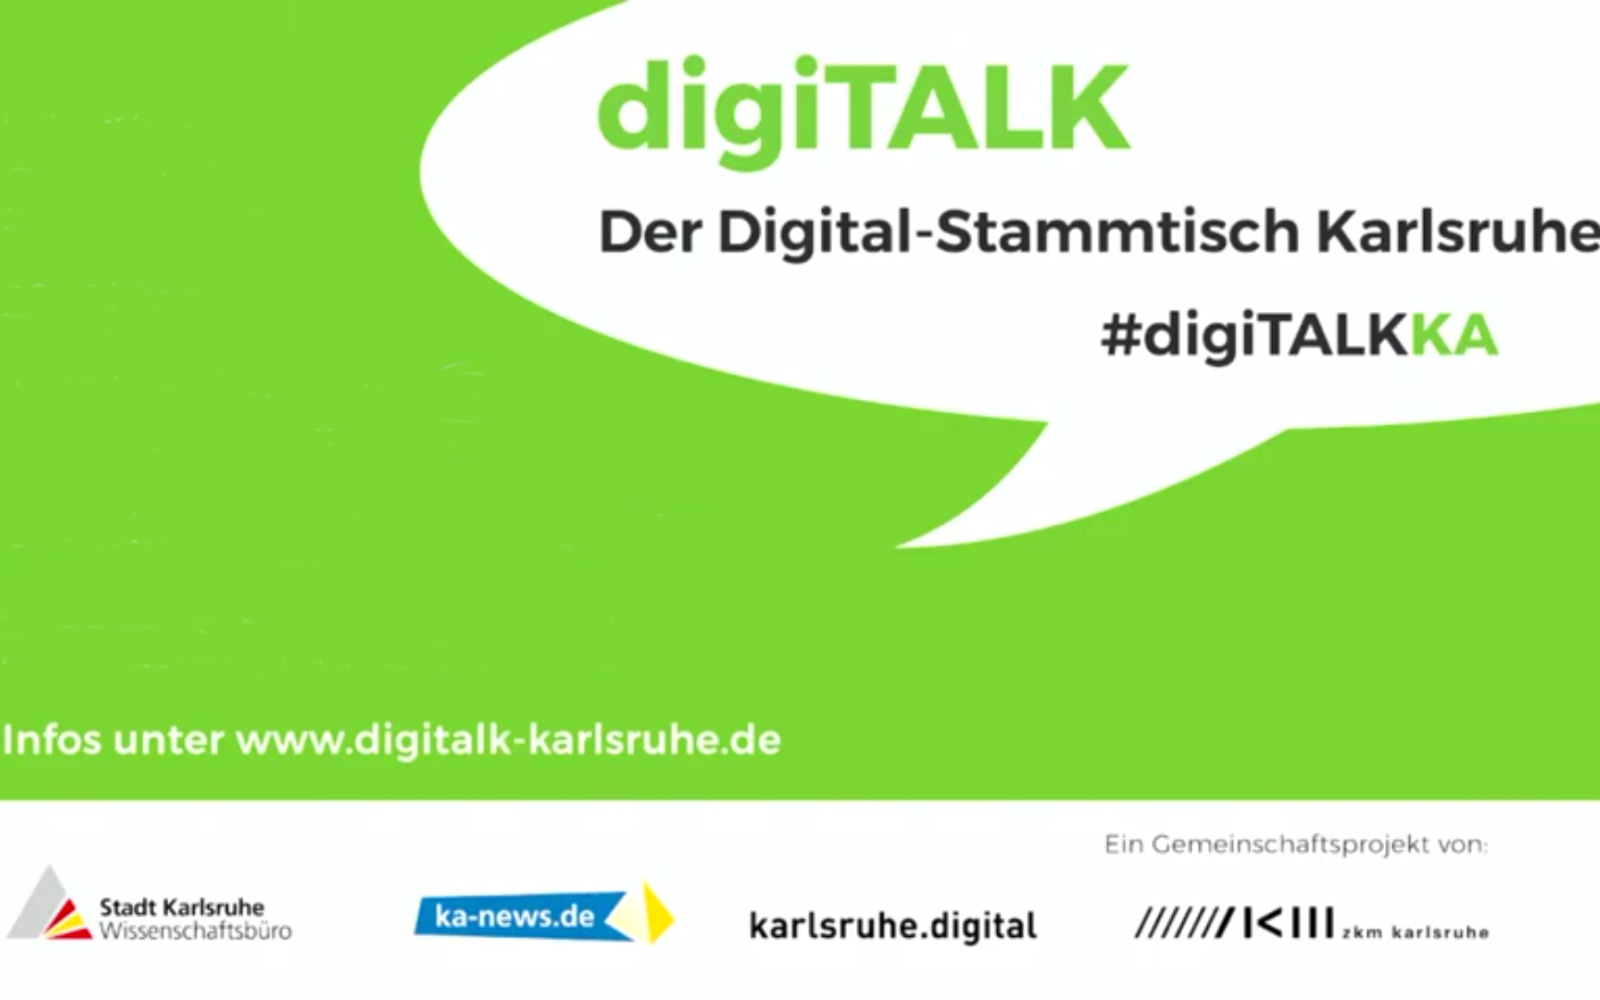 A man holds a microphone in his hand, people sit around him and listen. At the bottom it says "Digitalk Karlsruhe" and next to it a symbol of a pyramid. On the left is "#digiTALKKA" and the suggestion of a speech bubble.